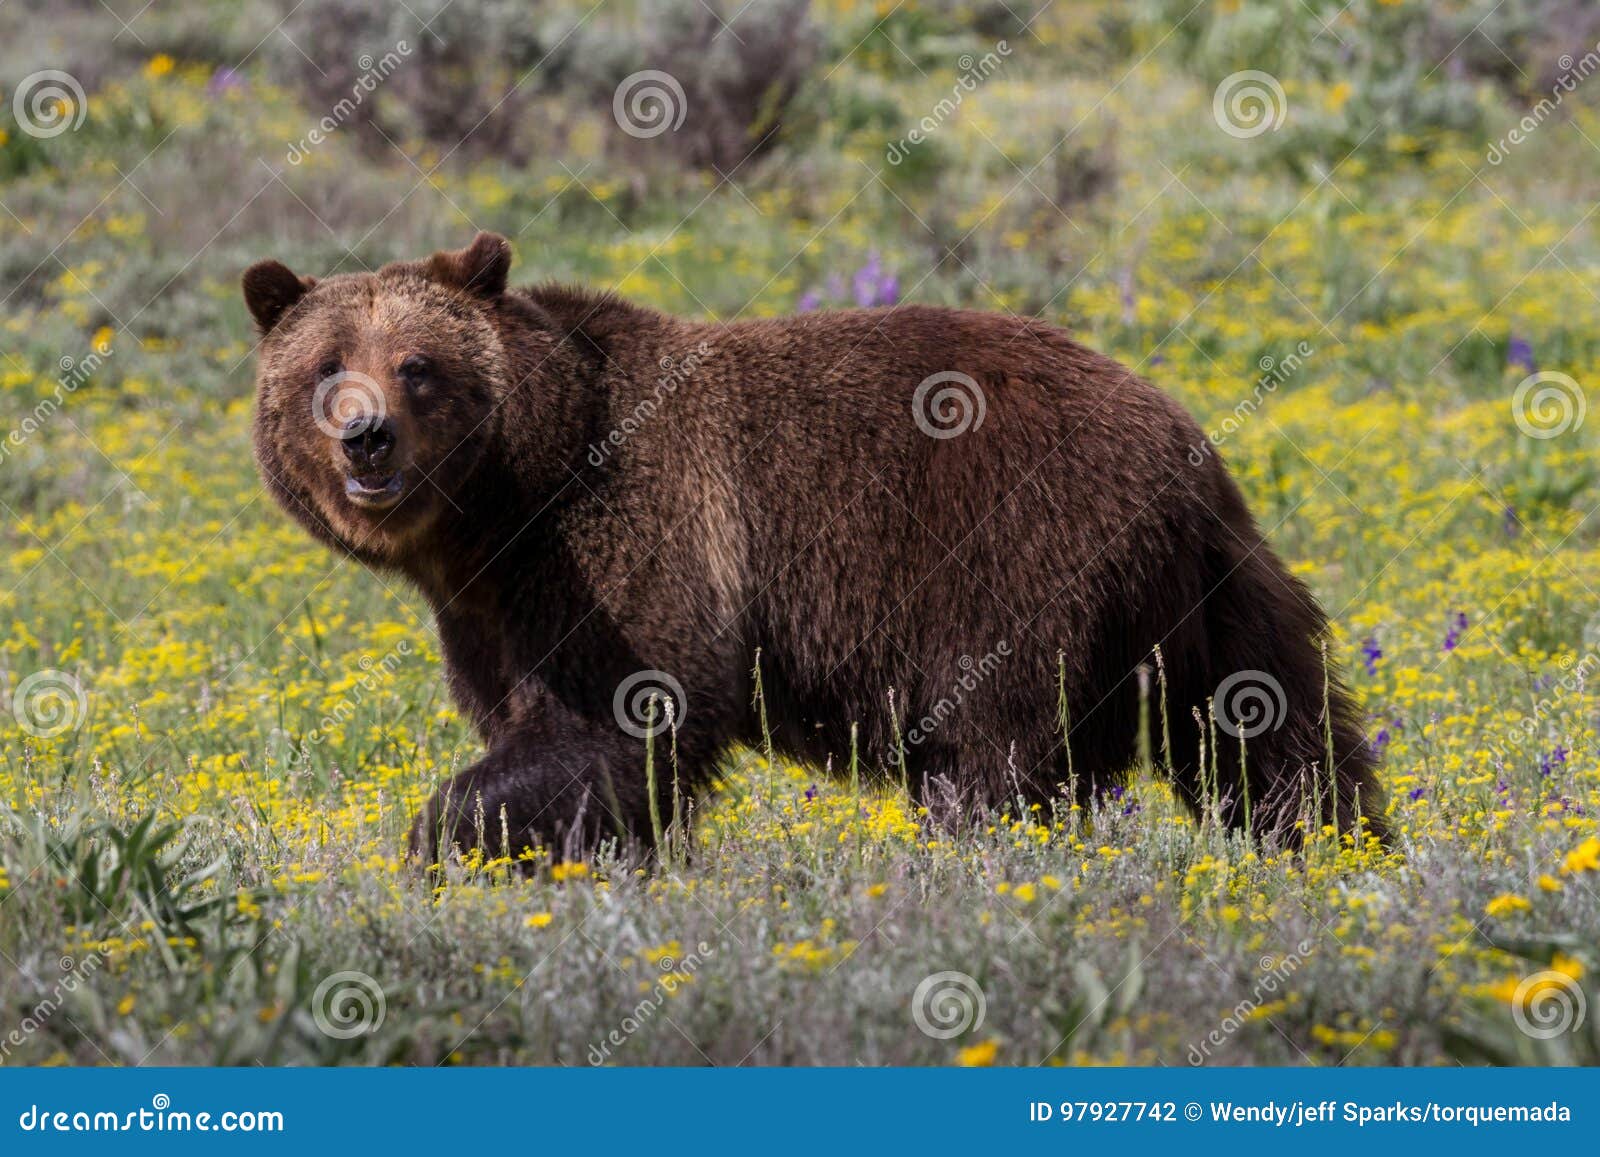 grizzly bear in spring meadow